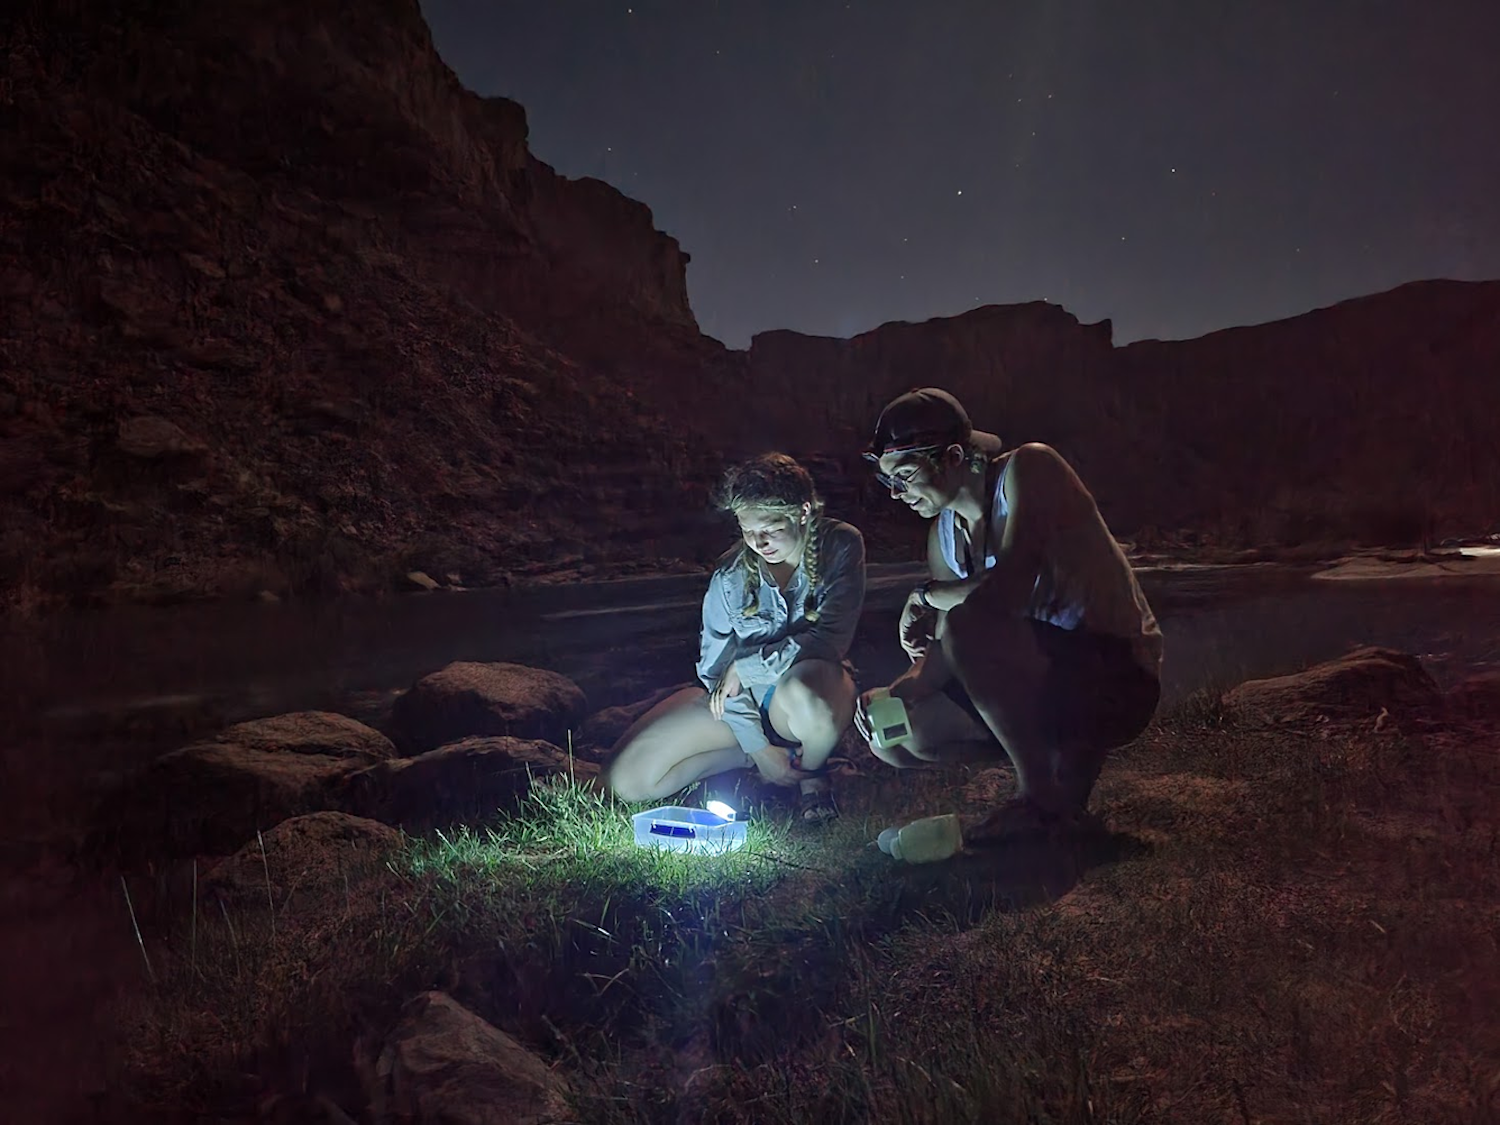 Community scientists deploy a light trap to sample aquatic insects along the Colorado River in Grand Canyon.